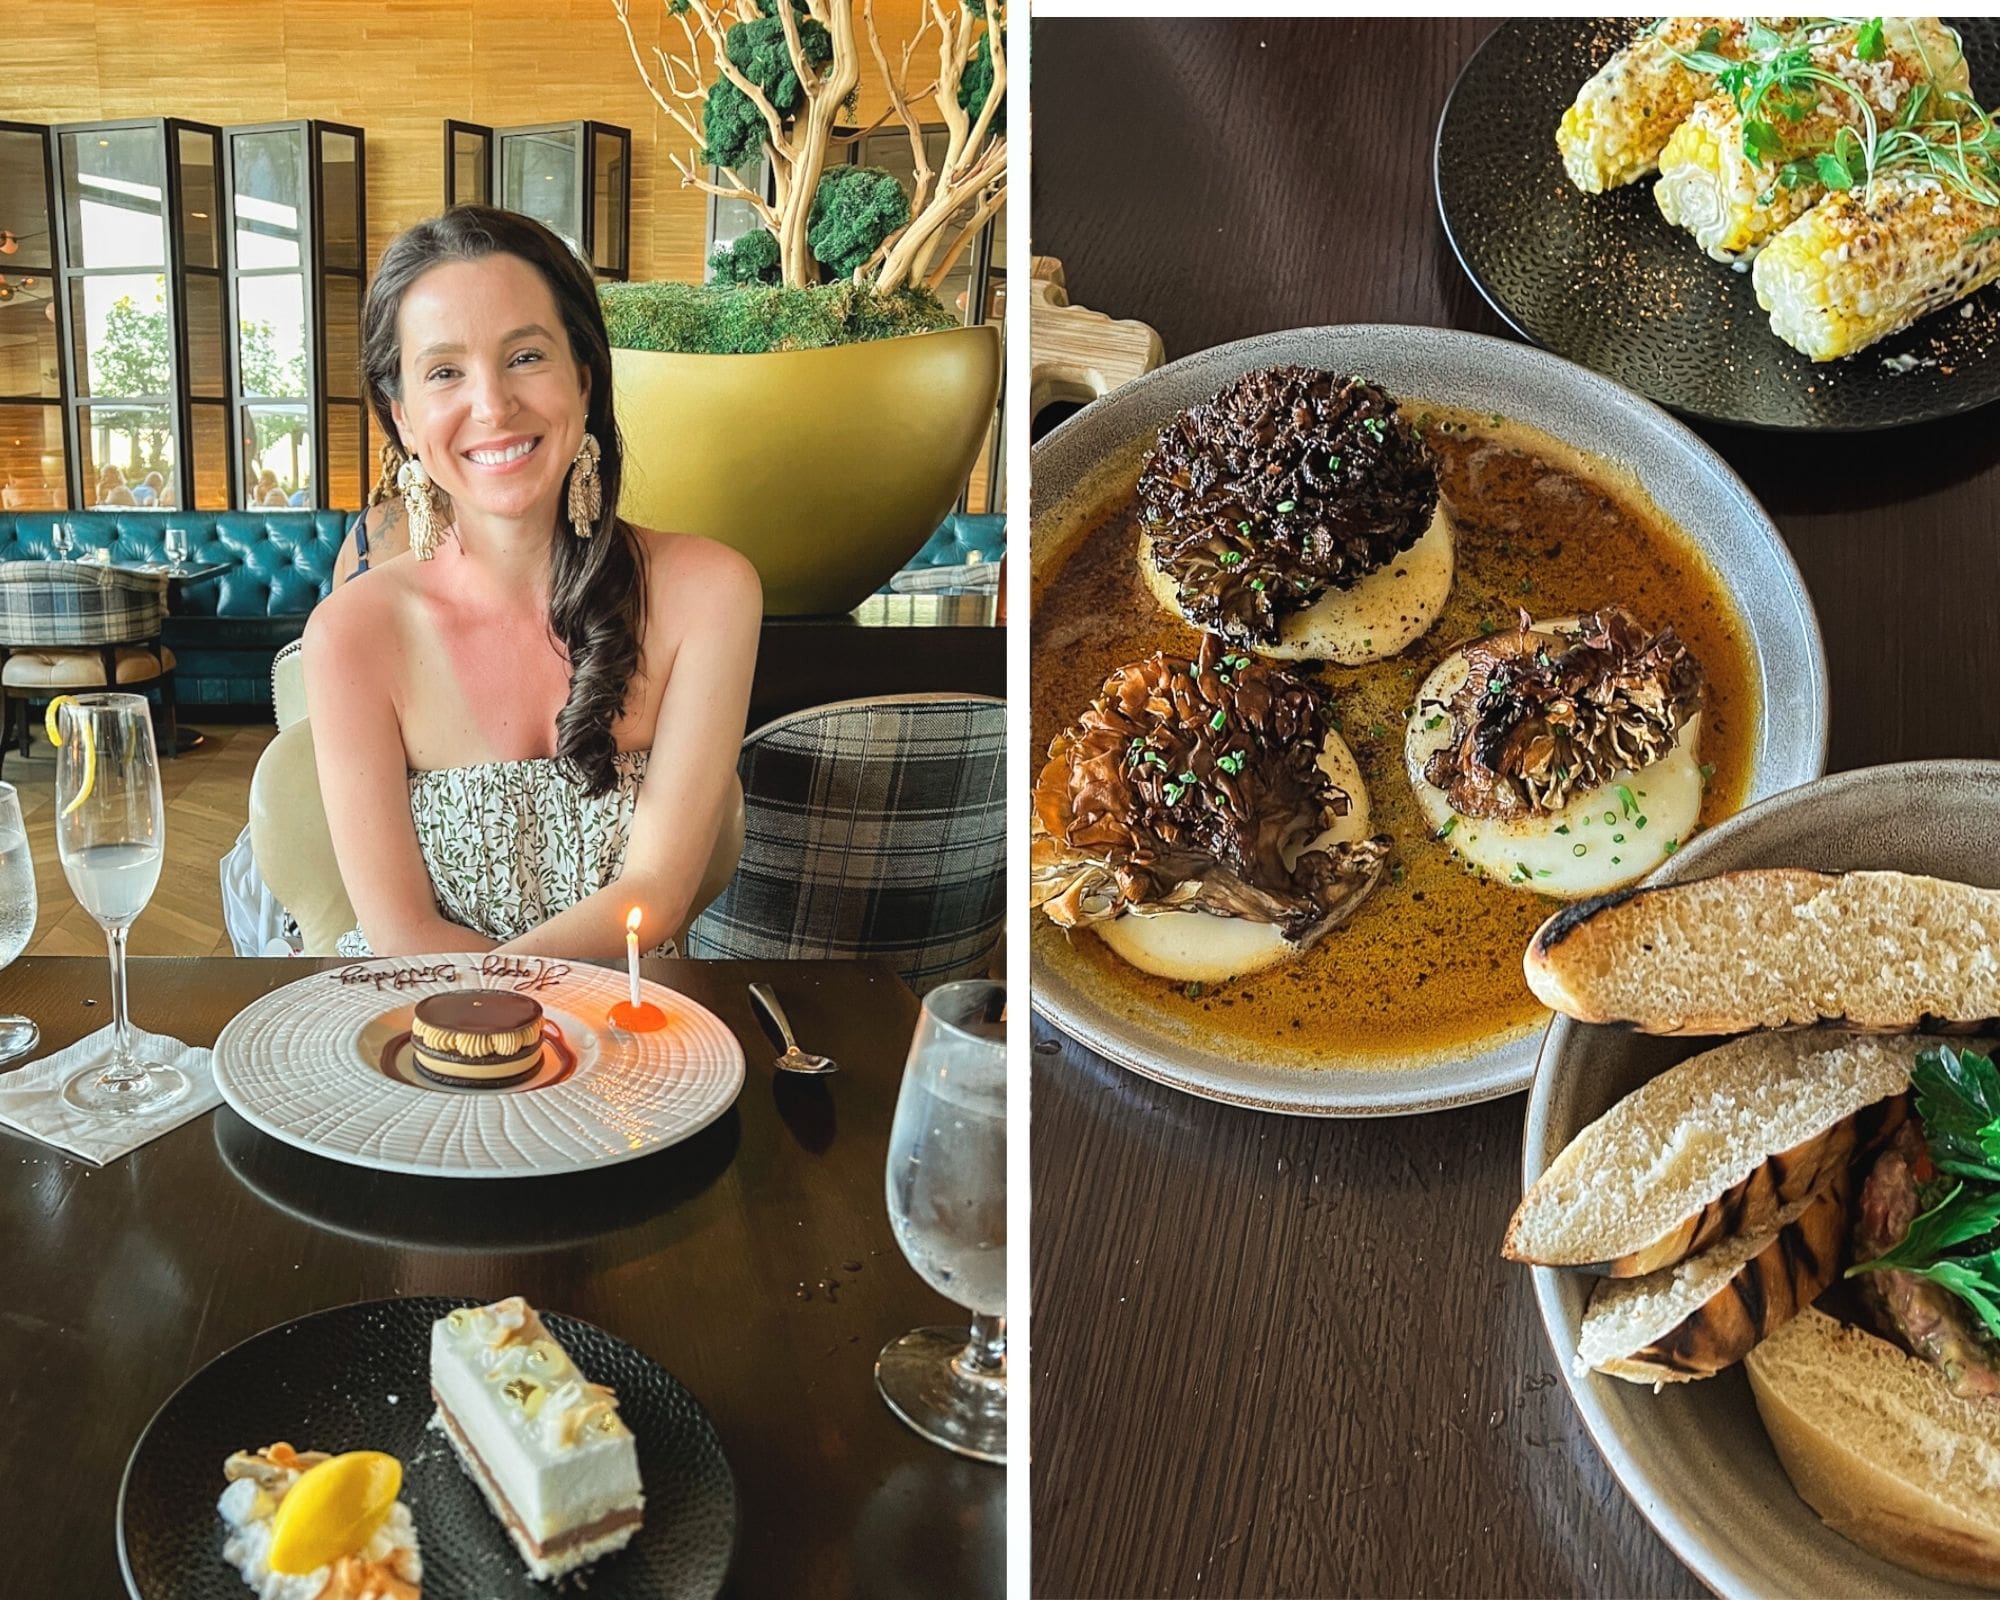 Blogger Stephanie Ziajka shares a recap of her meal at the Four Seasons St Louis restaurant, called the Cinder House, on Diary of a Debutante